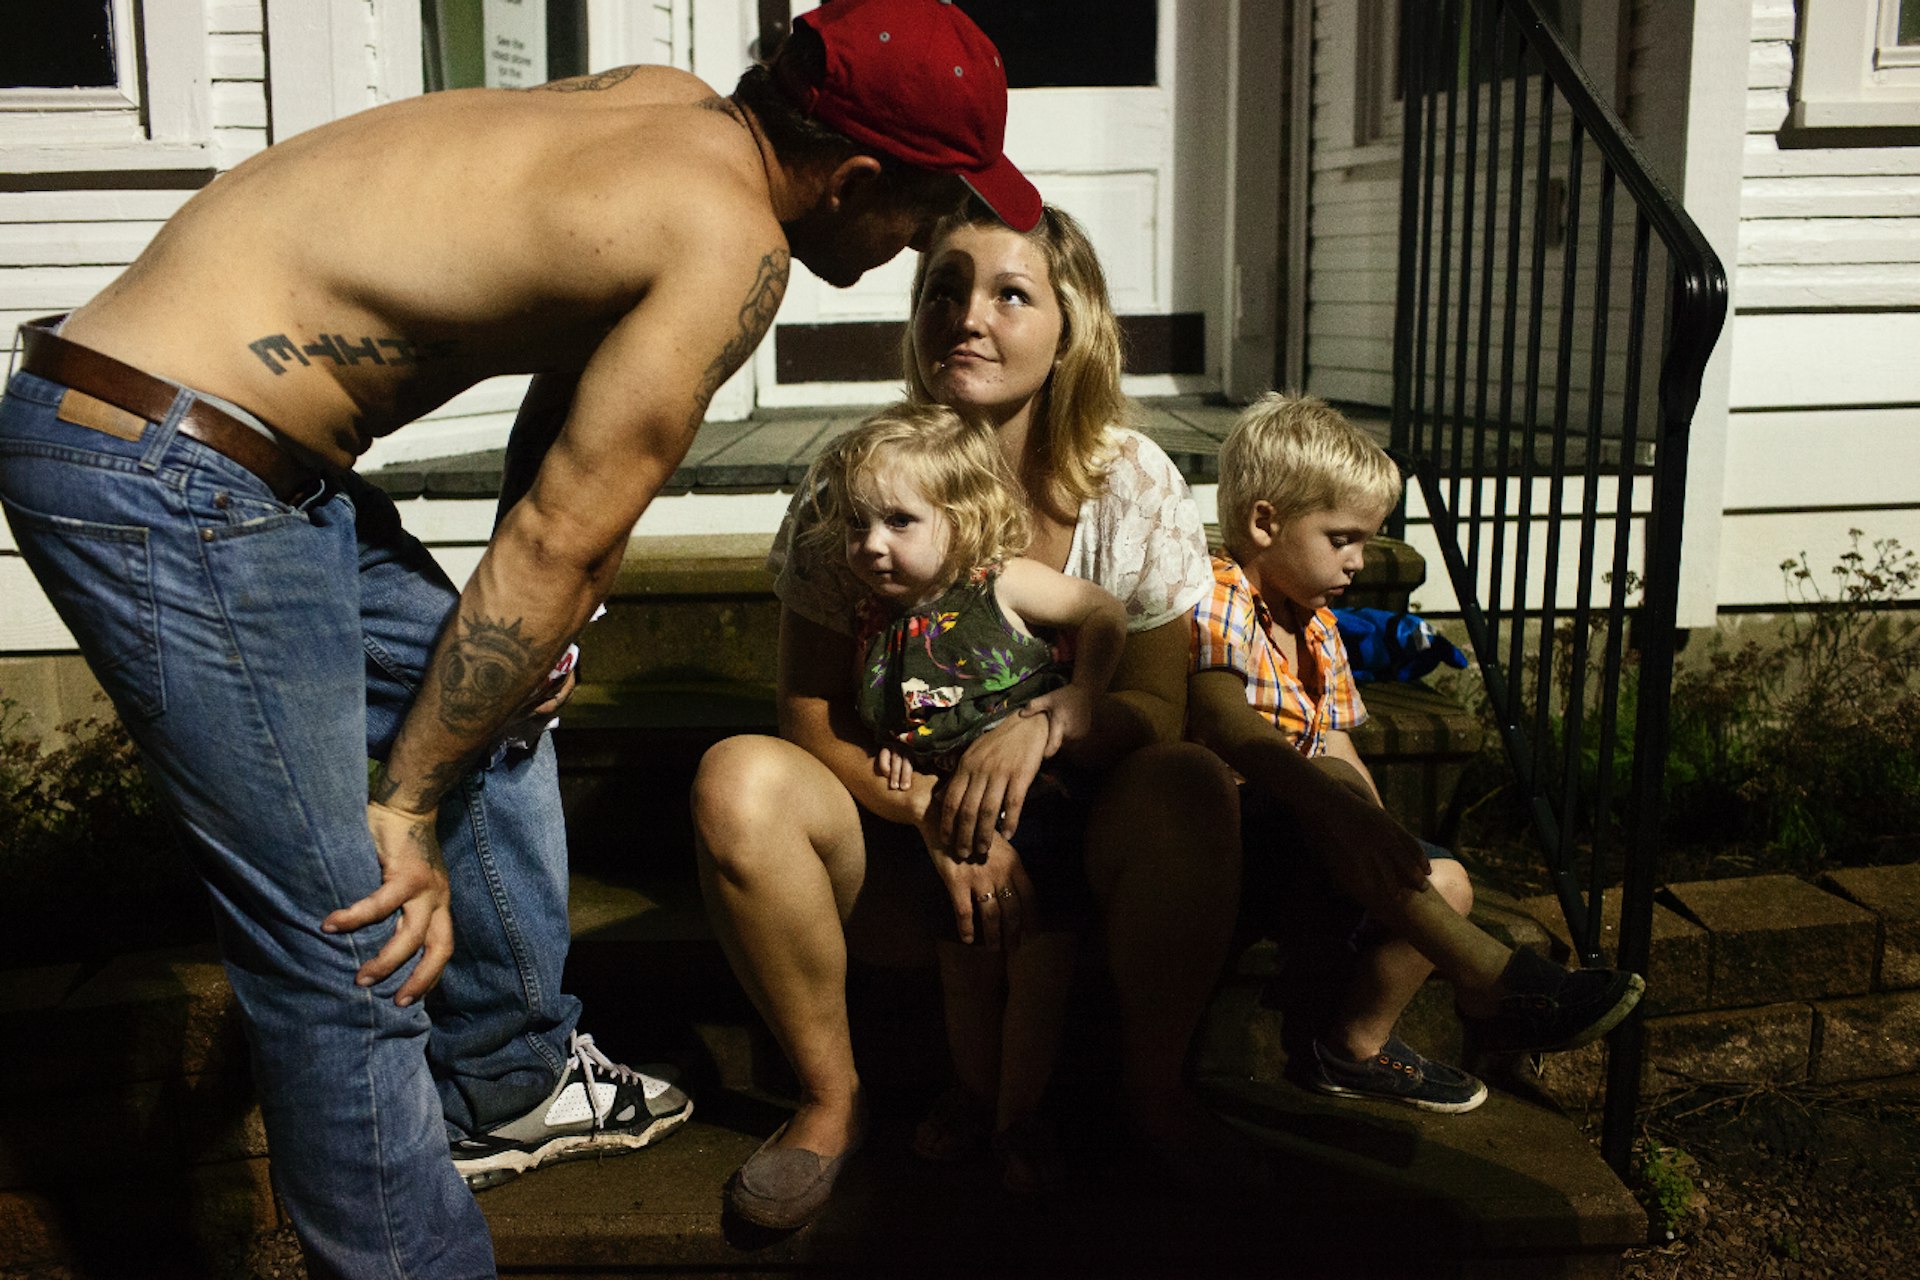 How a photographer captured a story of love and domestic abuse in Ohio